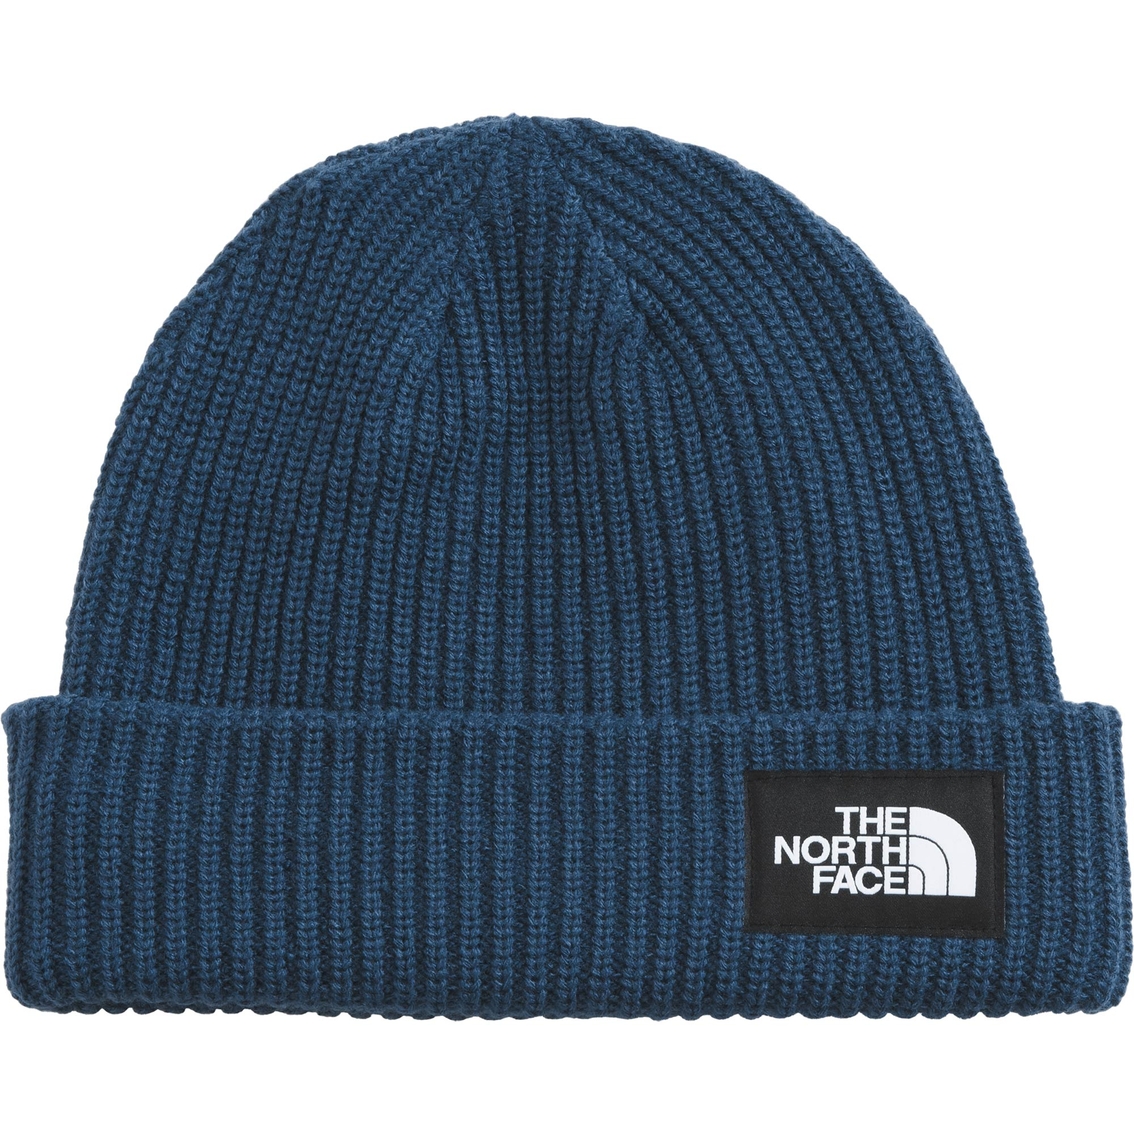 The North Face Salty Dog Beanie | Hats & Visors | Clothing ...